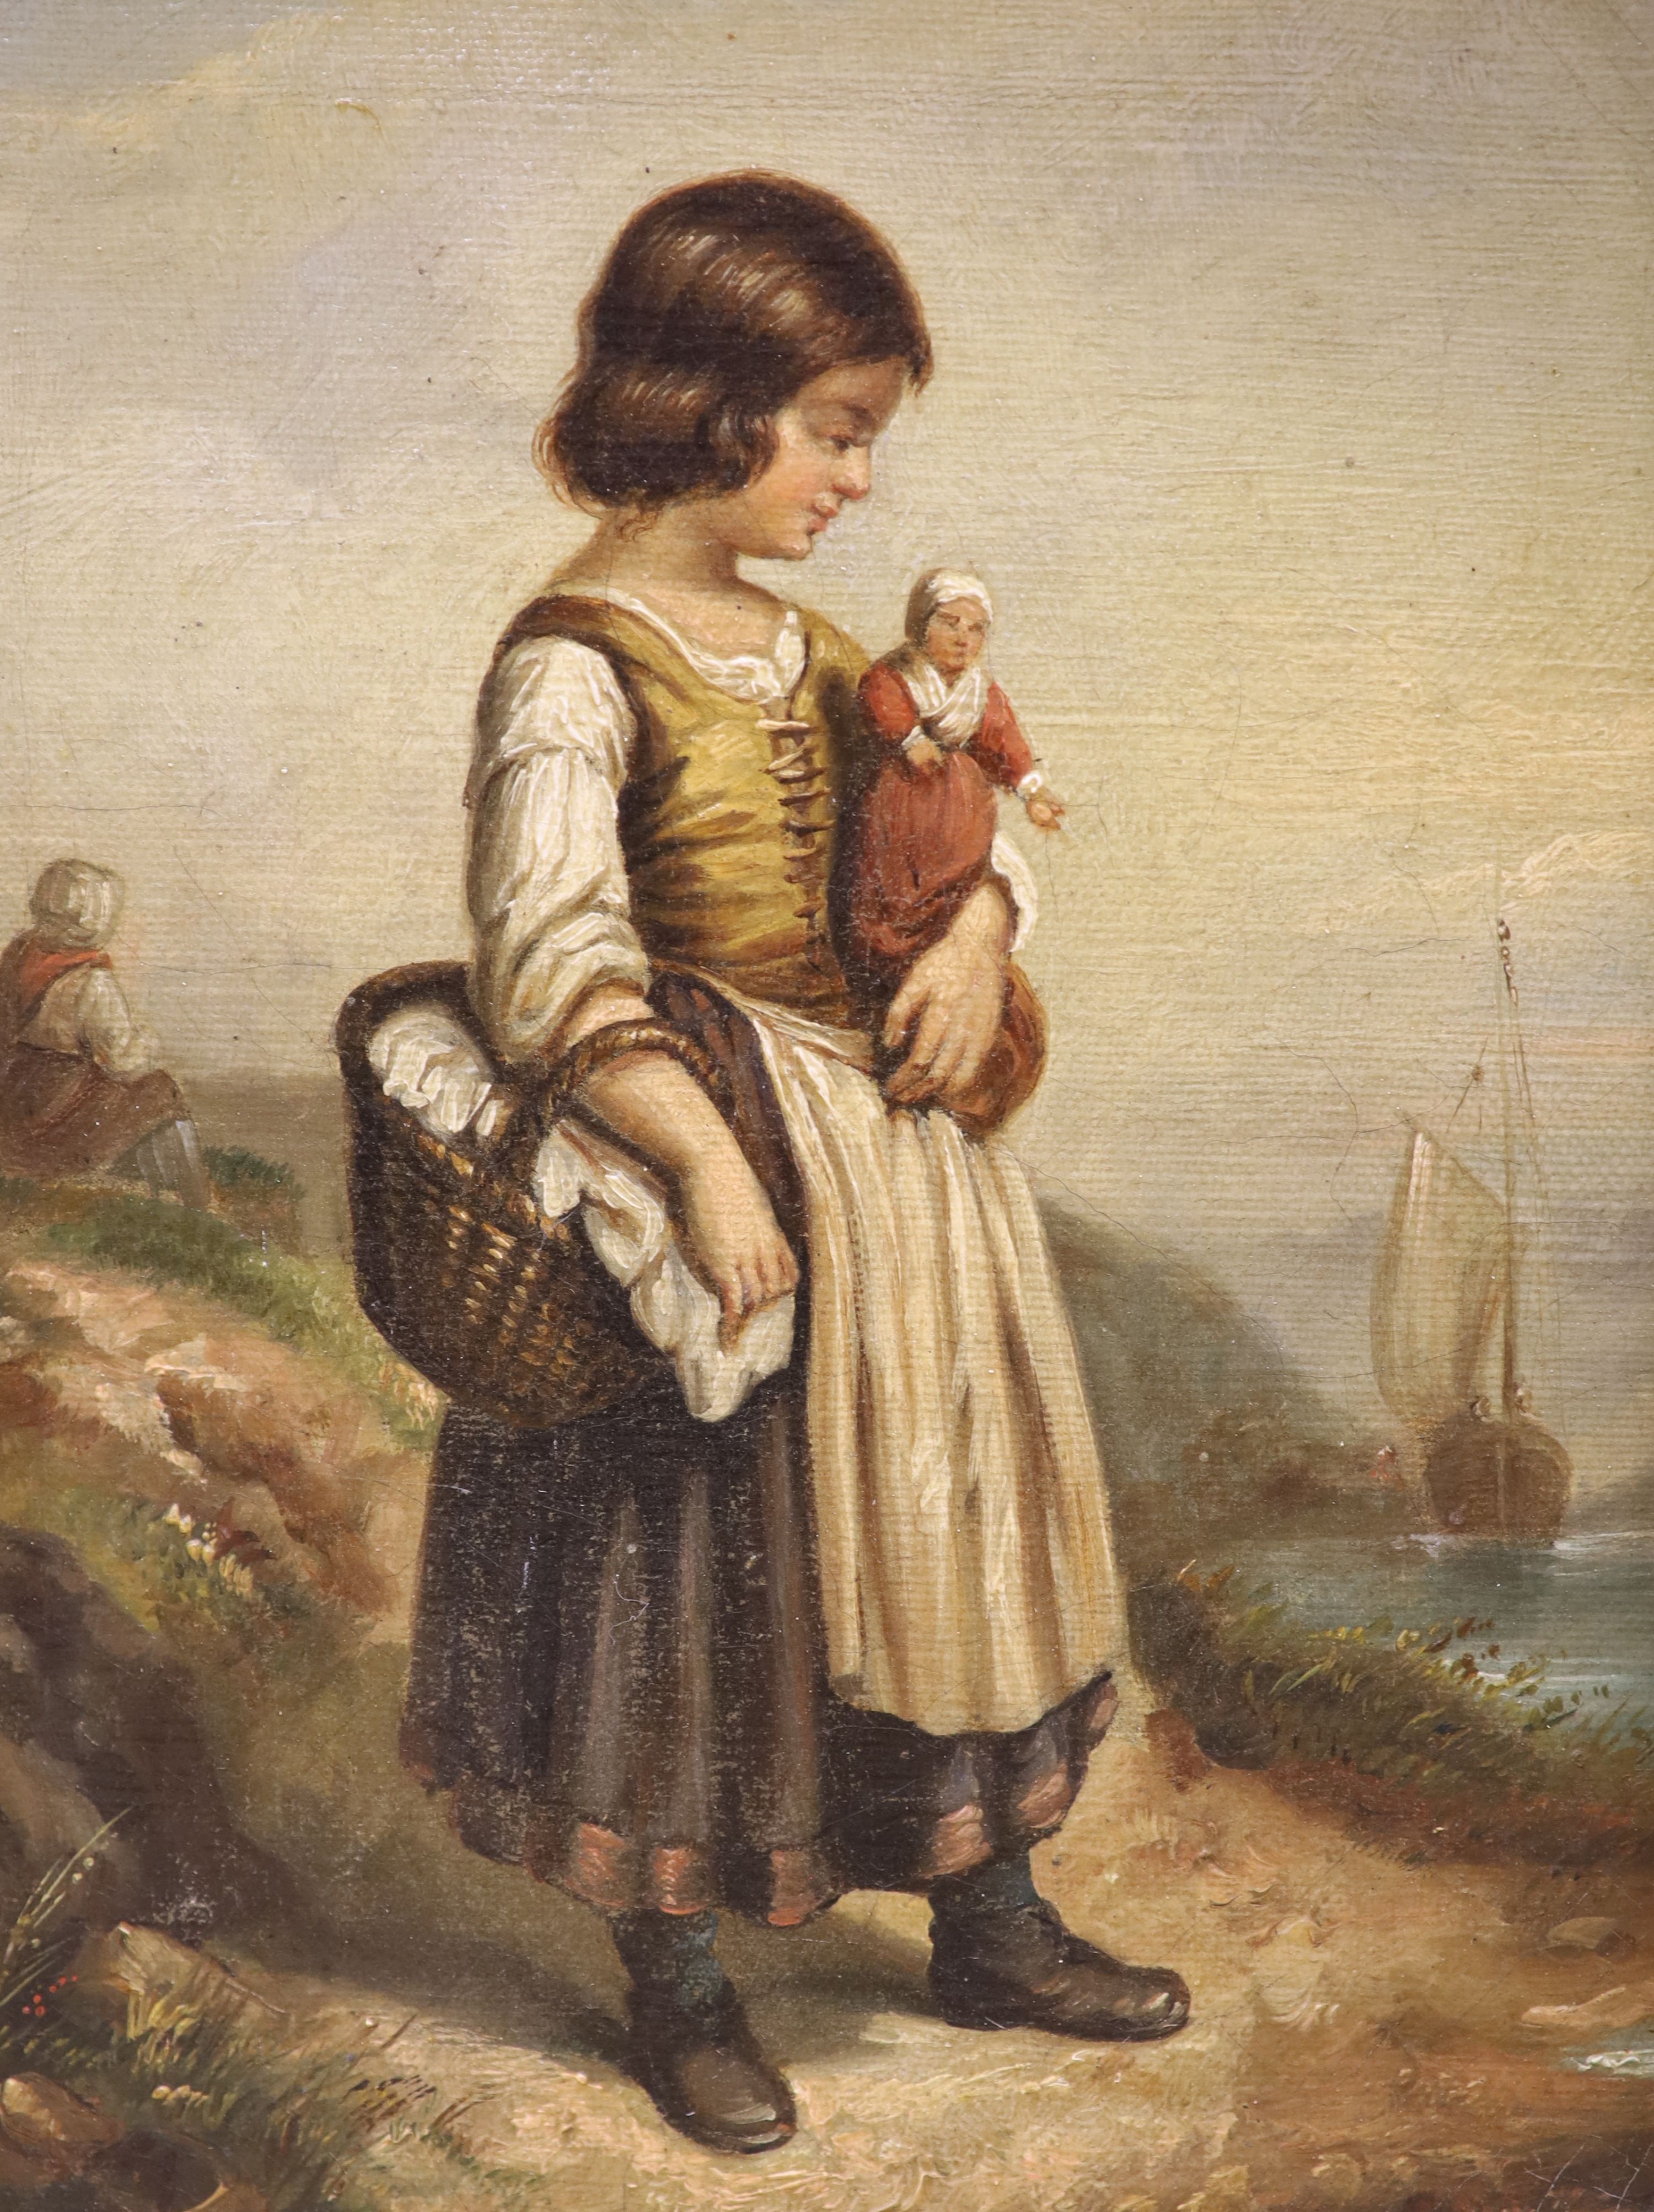 19th century French School, oil on canvas, Girl holding a doll standing upon the seashore, 21 x 16cm